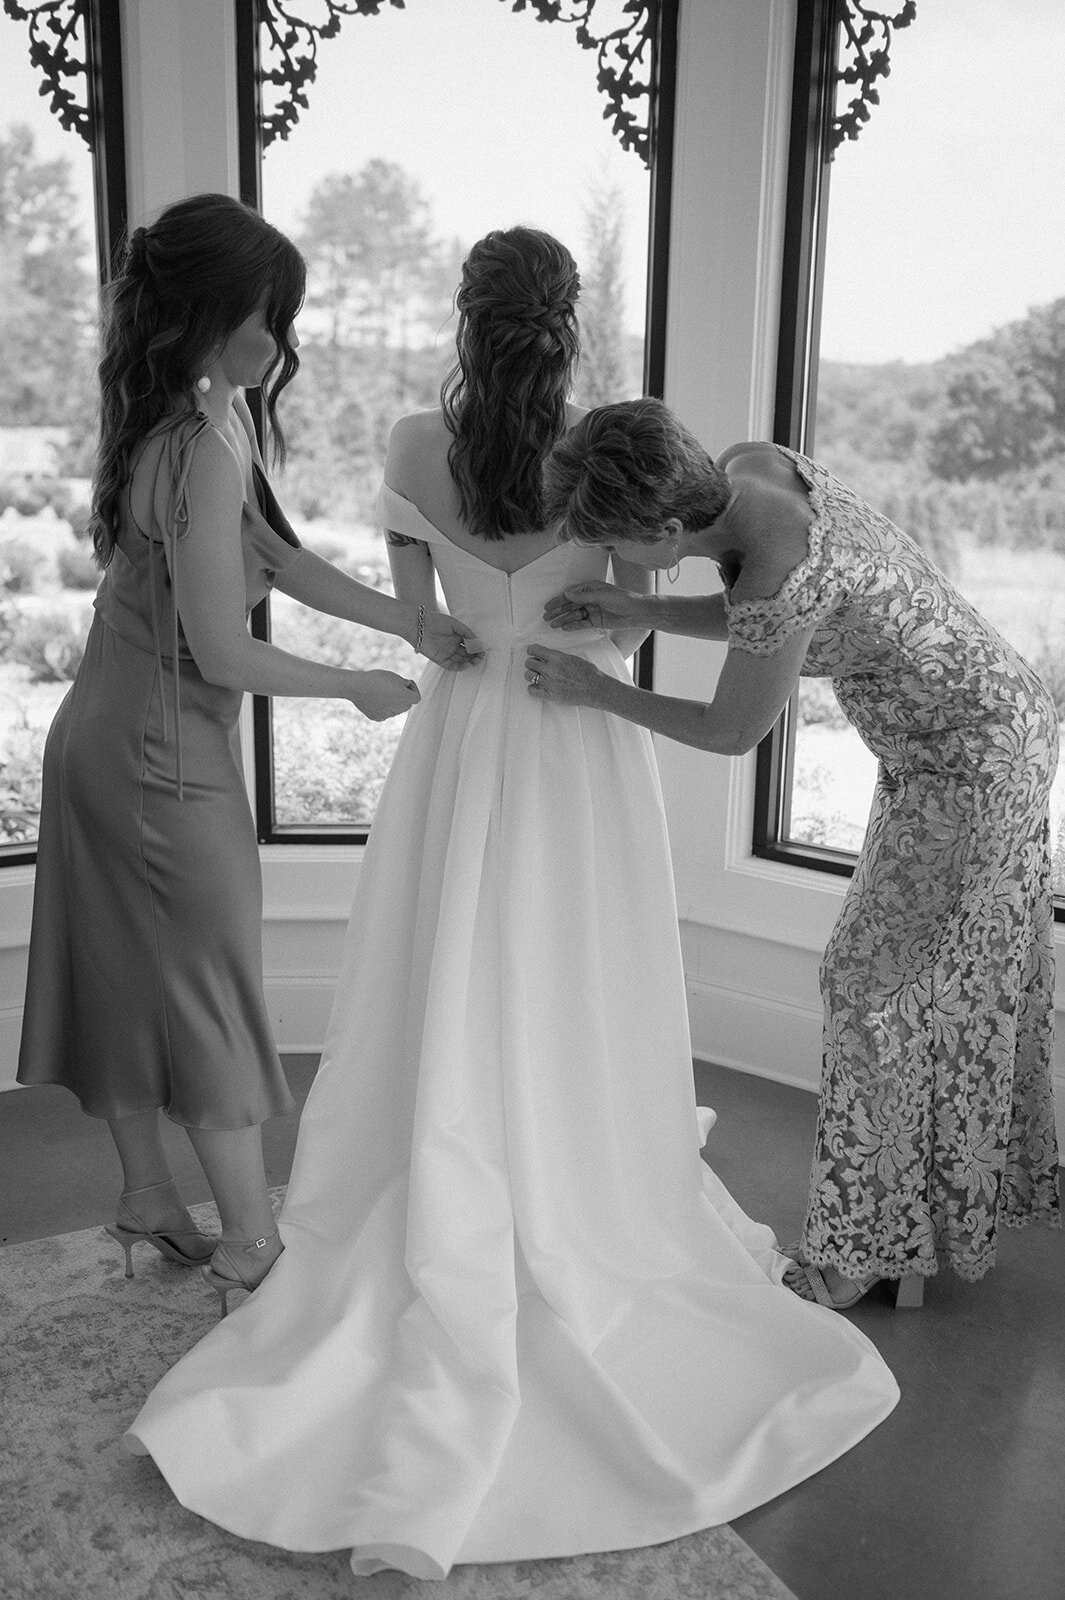 brides mom and sister helping bride get her wedding dress on